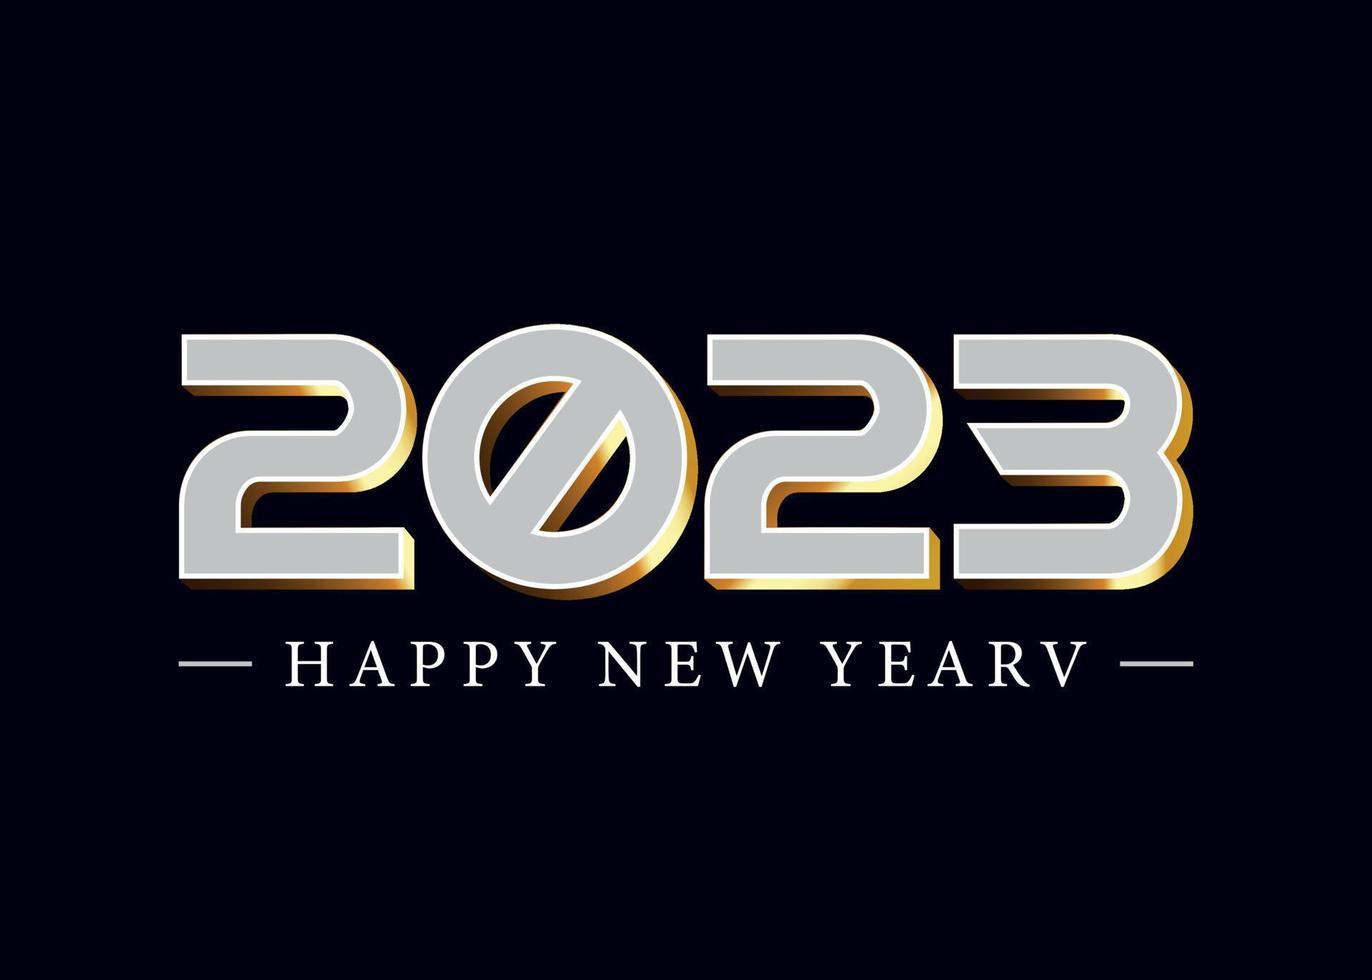 Best Happy New Year 2023 Abstract Isolated Graphic Design Template.  Decorative Digits 0, 2, 3. Gold Logotype Concept In 3D Style. White Luxury Number With 3D Effect With Black Background. vector